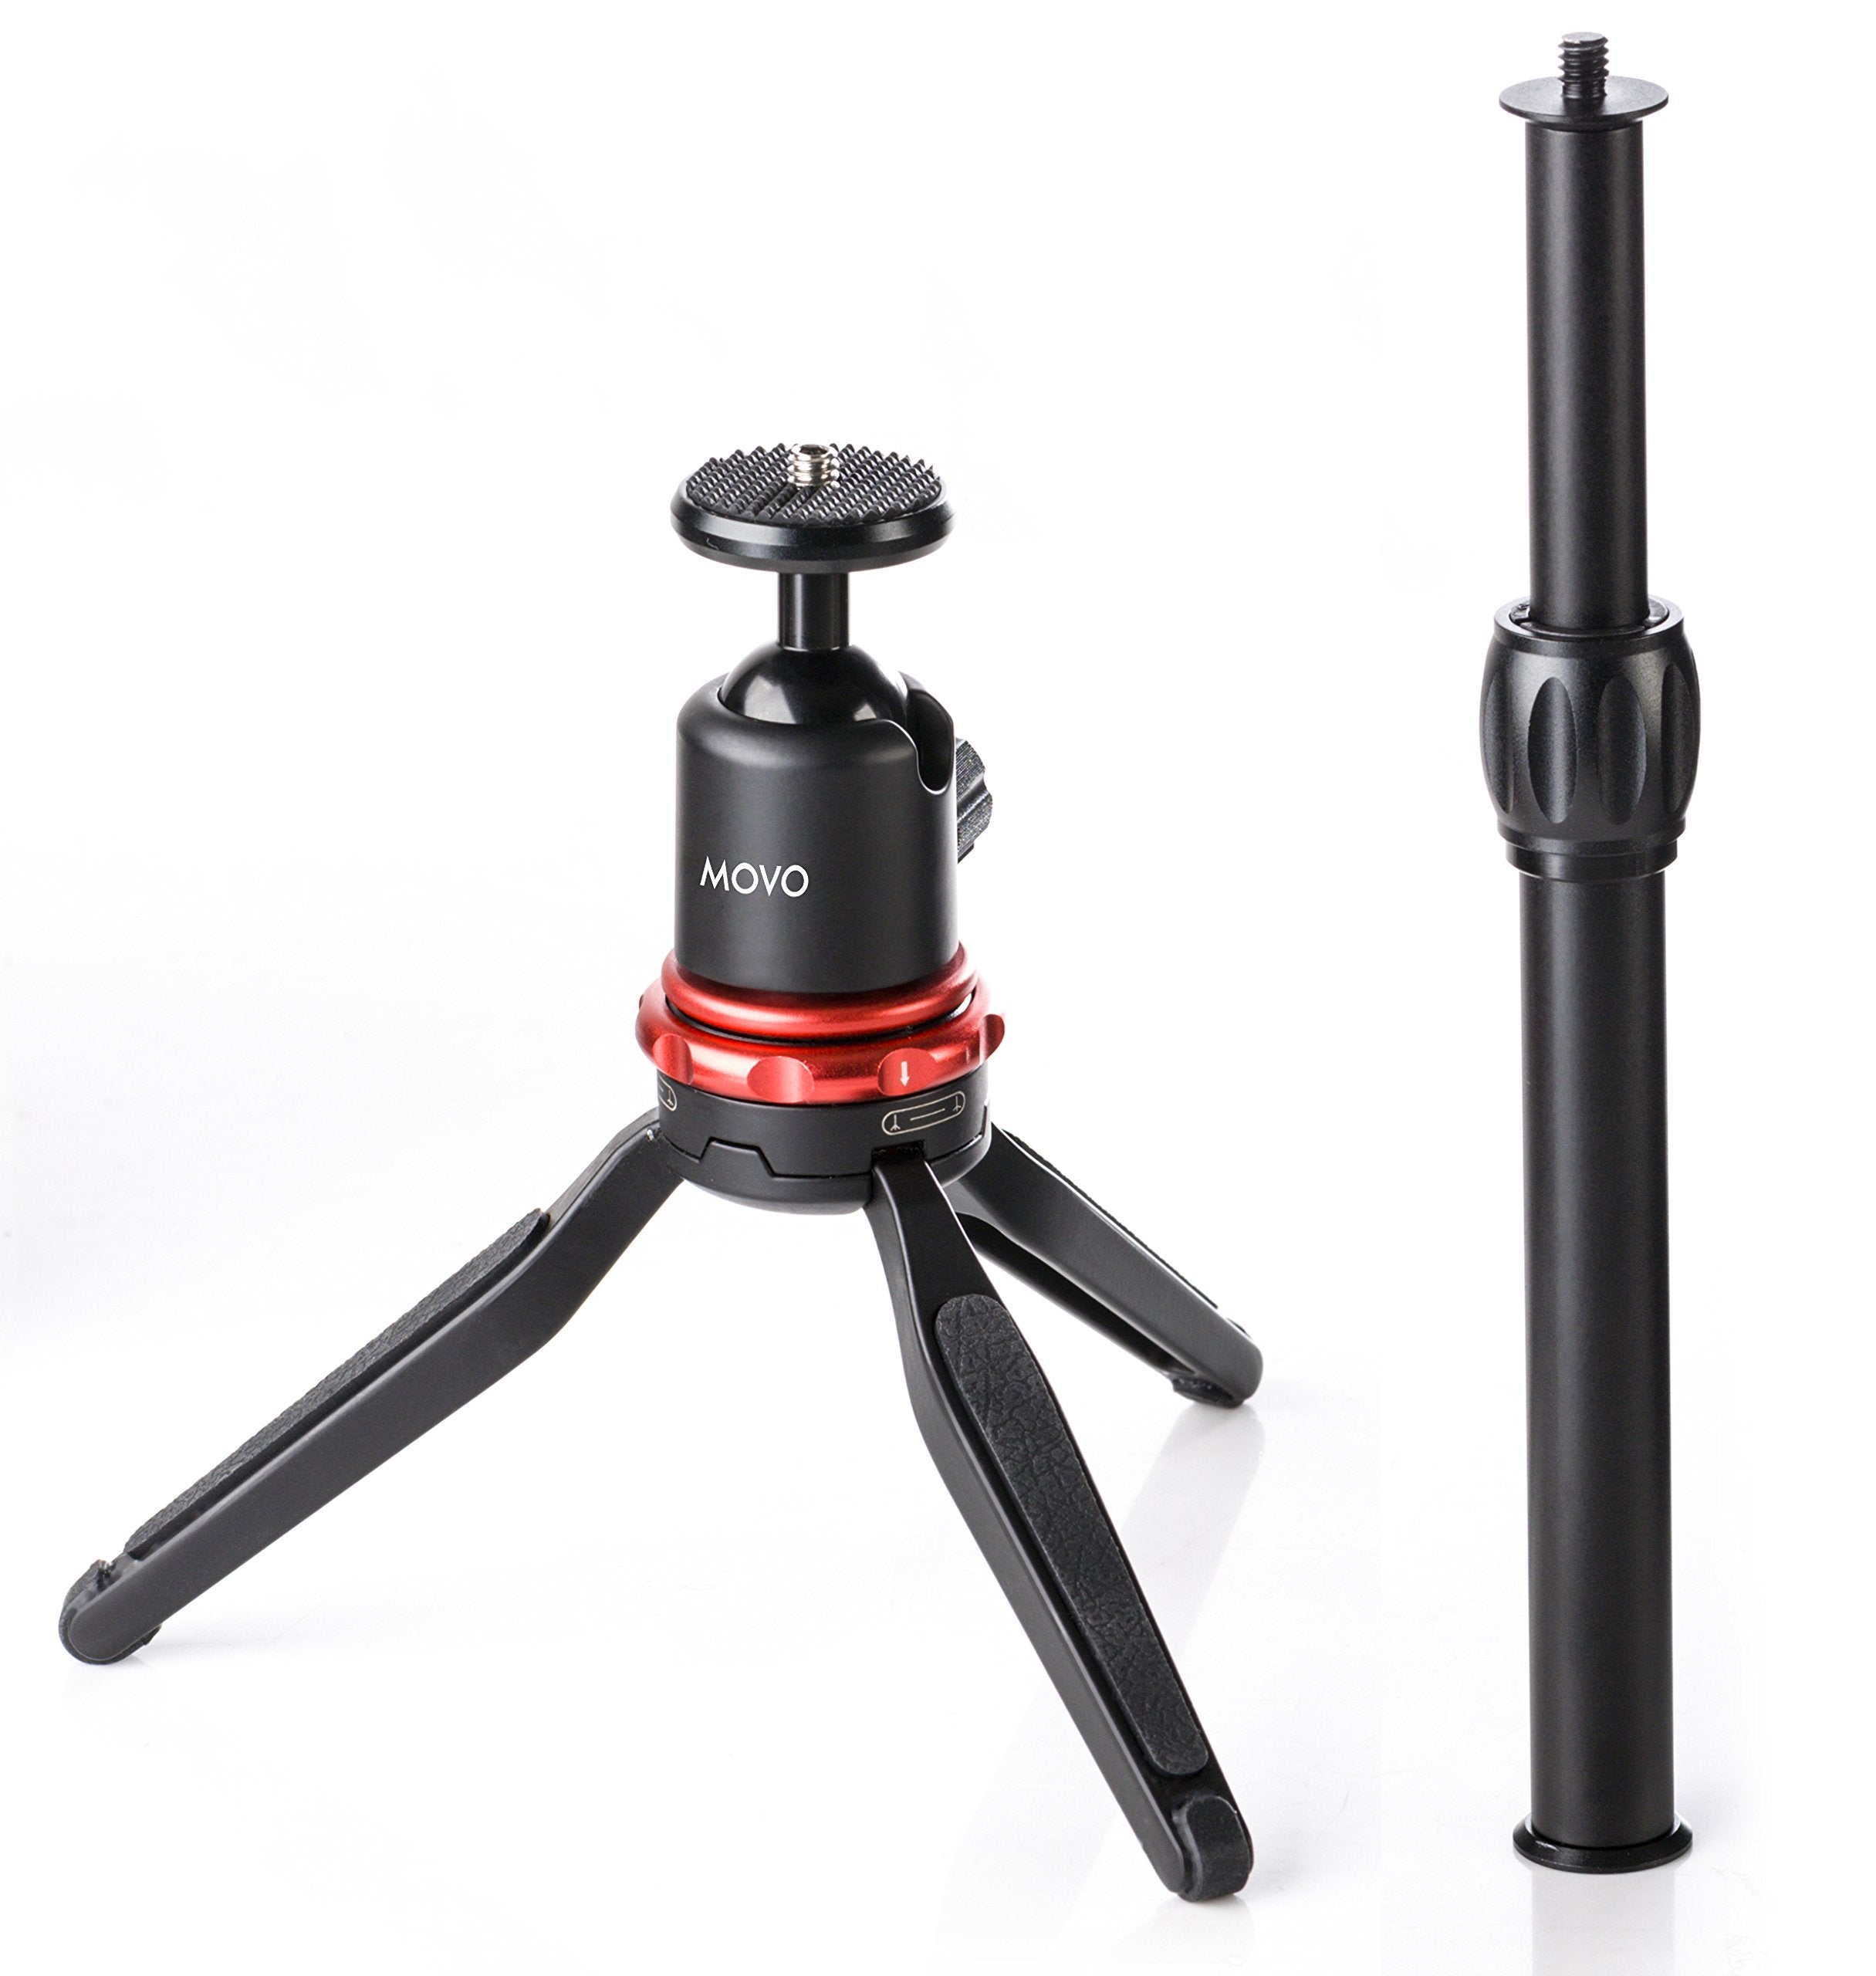 Movo Universal Mini Camera Tripod with Extendable Pole (MV-T1) Adjustable Head, Heavy-Duty Aluminum Travel Stand for DSLR, Mirrorless, GoPro, Smartphones, Compact, Portable